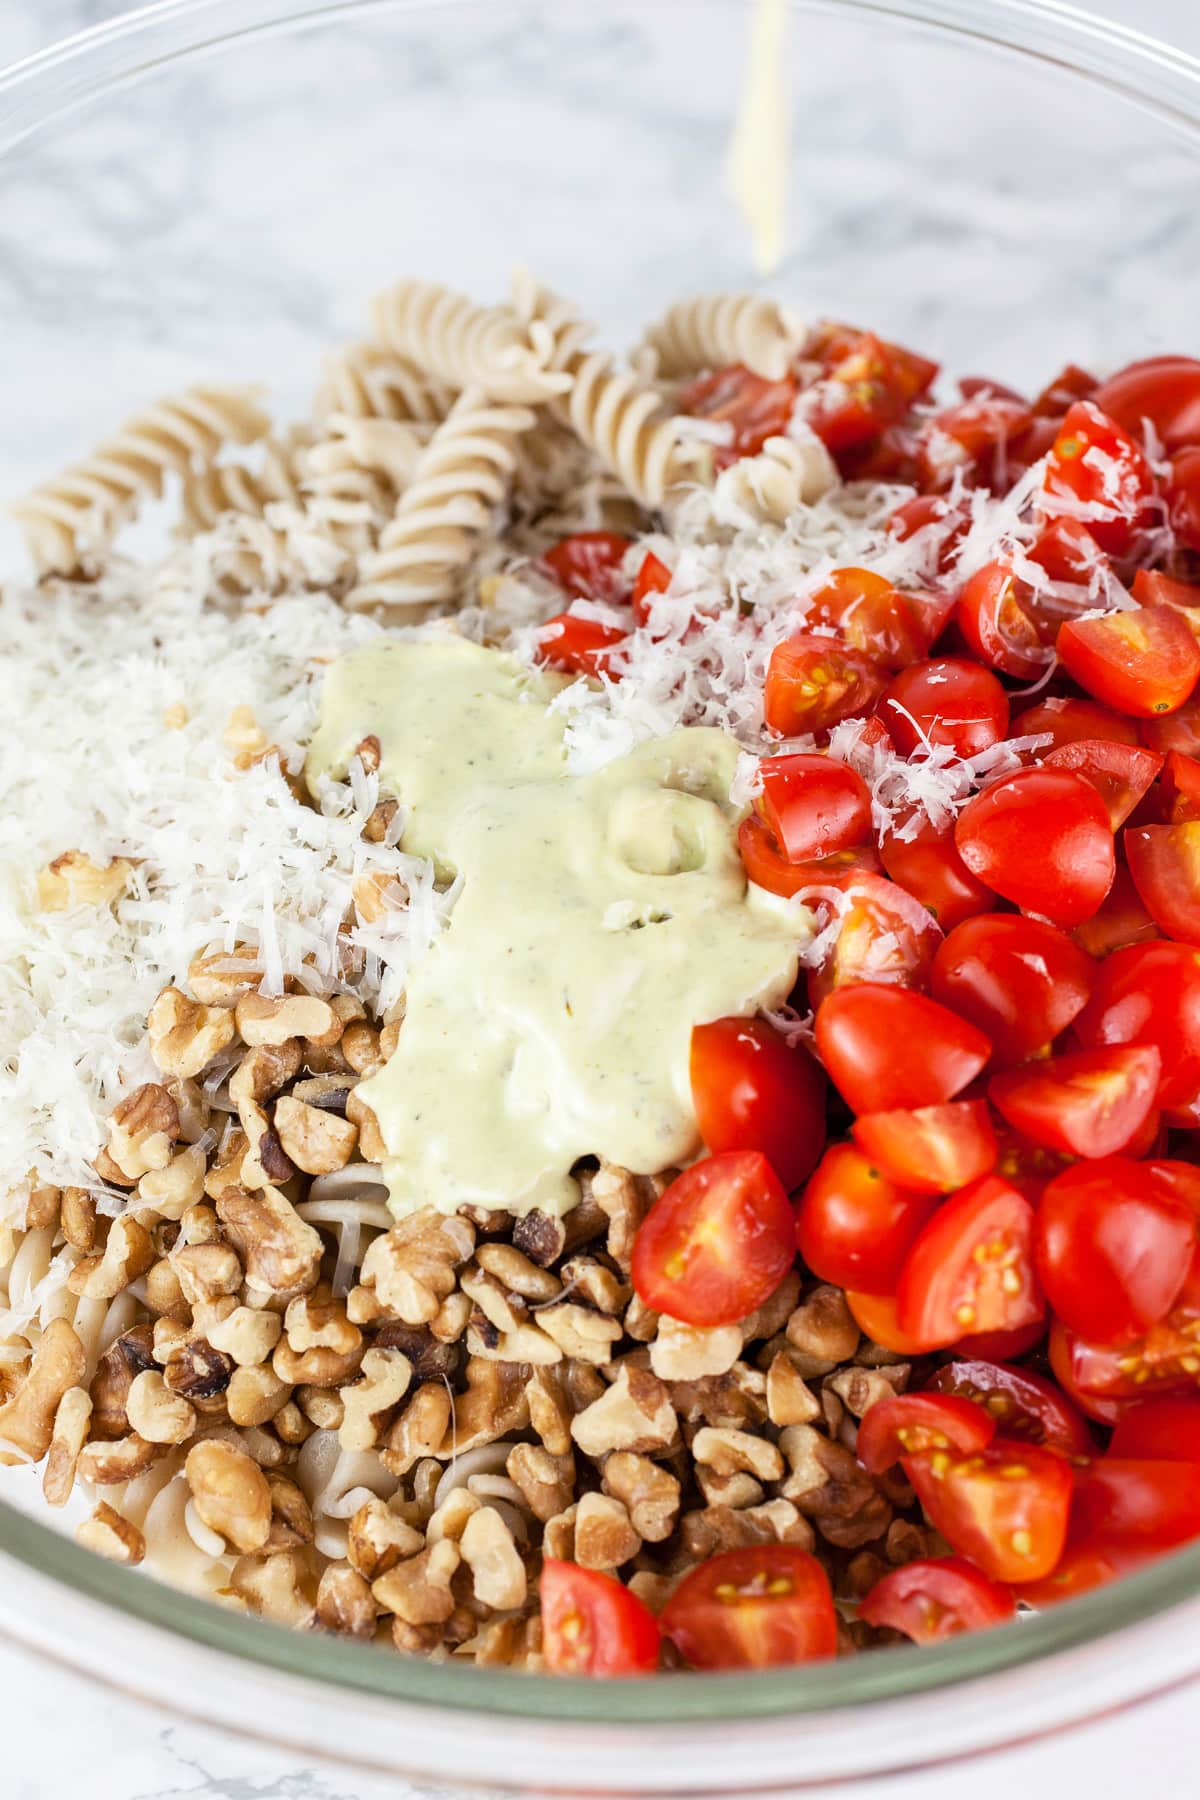 Creamy pesto dressing poured over pasta, tomatoes, walnuts, and Parmesan cheese in large glass bowl.